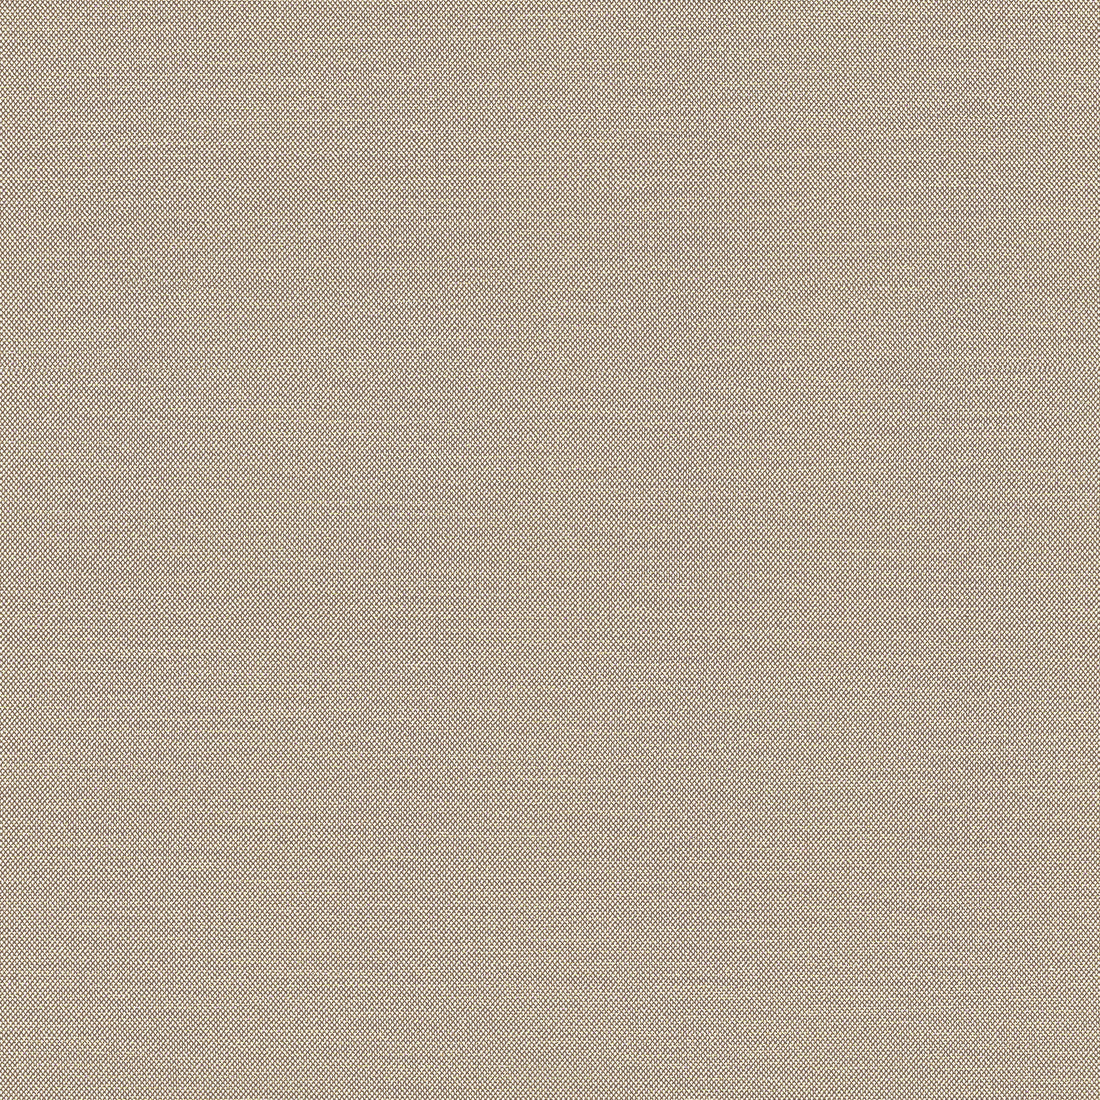 Tessa fabric in jute color - pattern number W81652 - by Thibaut in the Locale collection